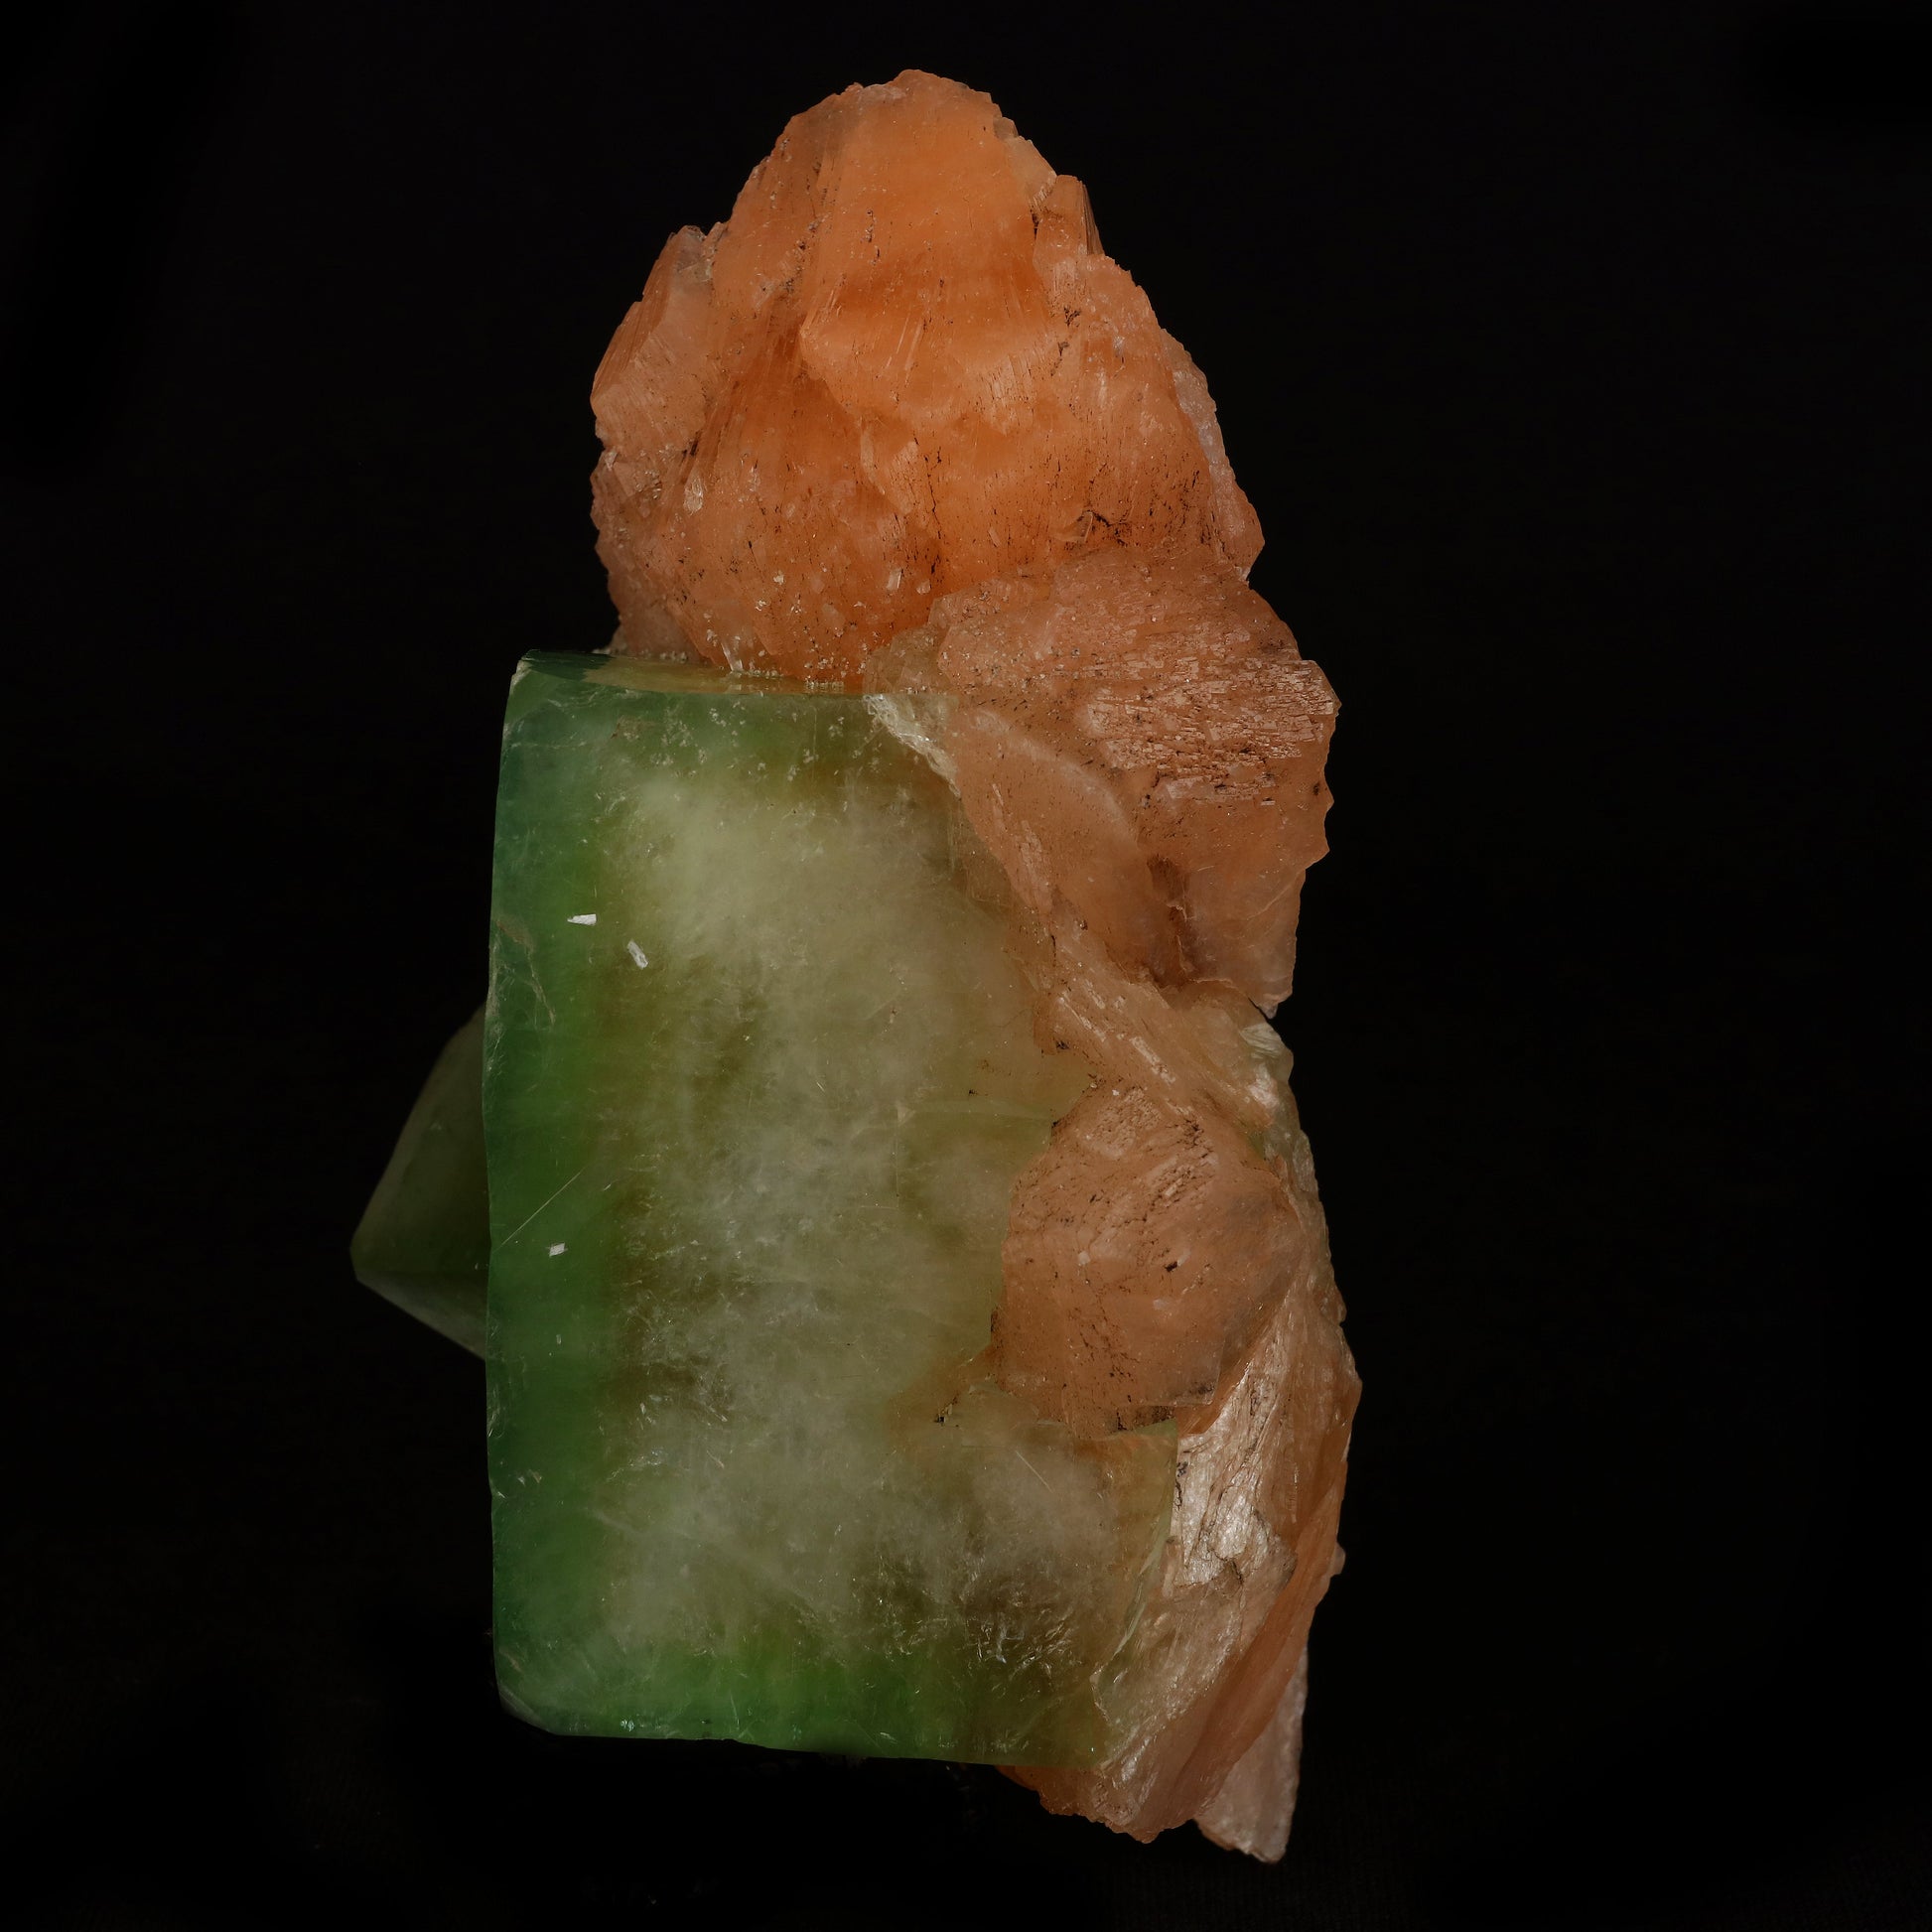 Green Apophyllite Cube With Stilbite Natural Mineral Specimen # B 508…  https://www.superbminerals.us/products/green-apophyllite-cube-with-stilbite-natural-mineral-specimen-b-5080  Features: A striking, large blocky, color-zoned apophyllite crystal aesthetically flanked by similar smaller crystals dramatically highlights this impressive large mounded combination from recent finds in Jalgaon. The glassy, translucent tetragonal apophyllites have rich mint-green centers and colorless terminations